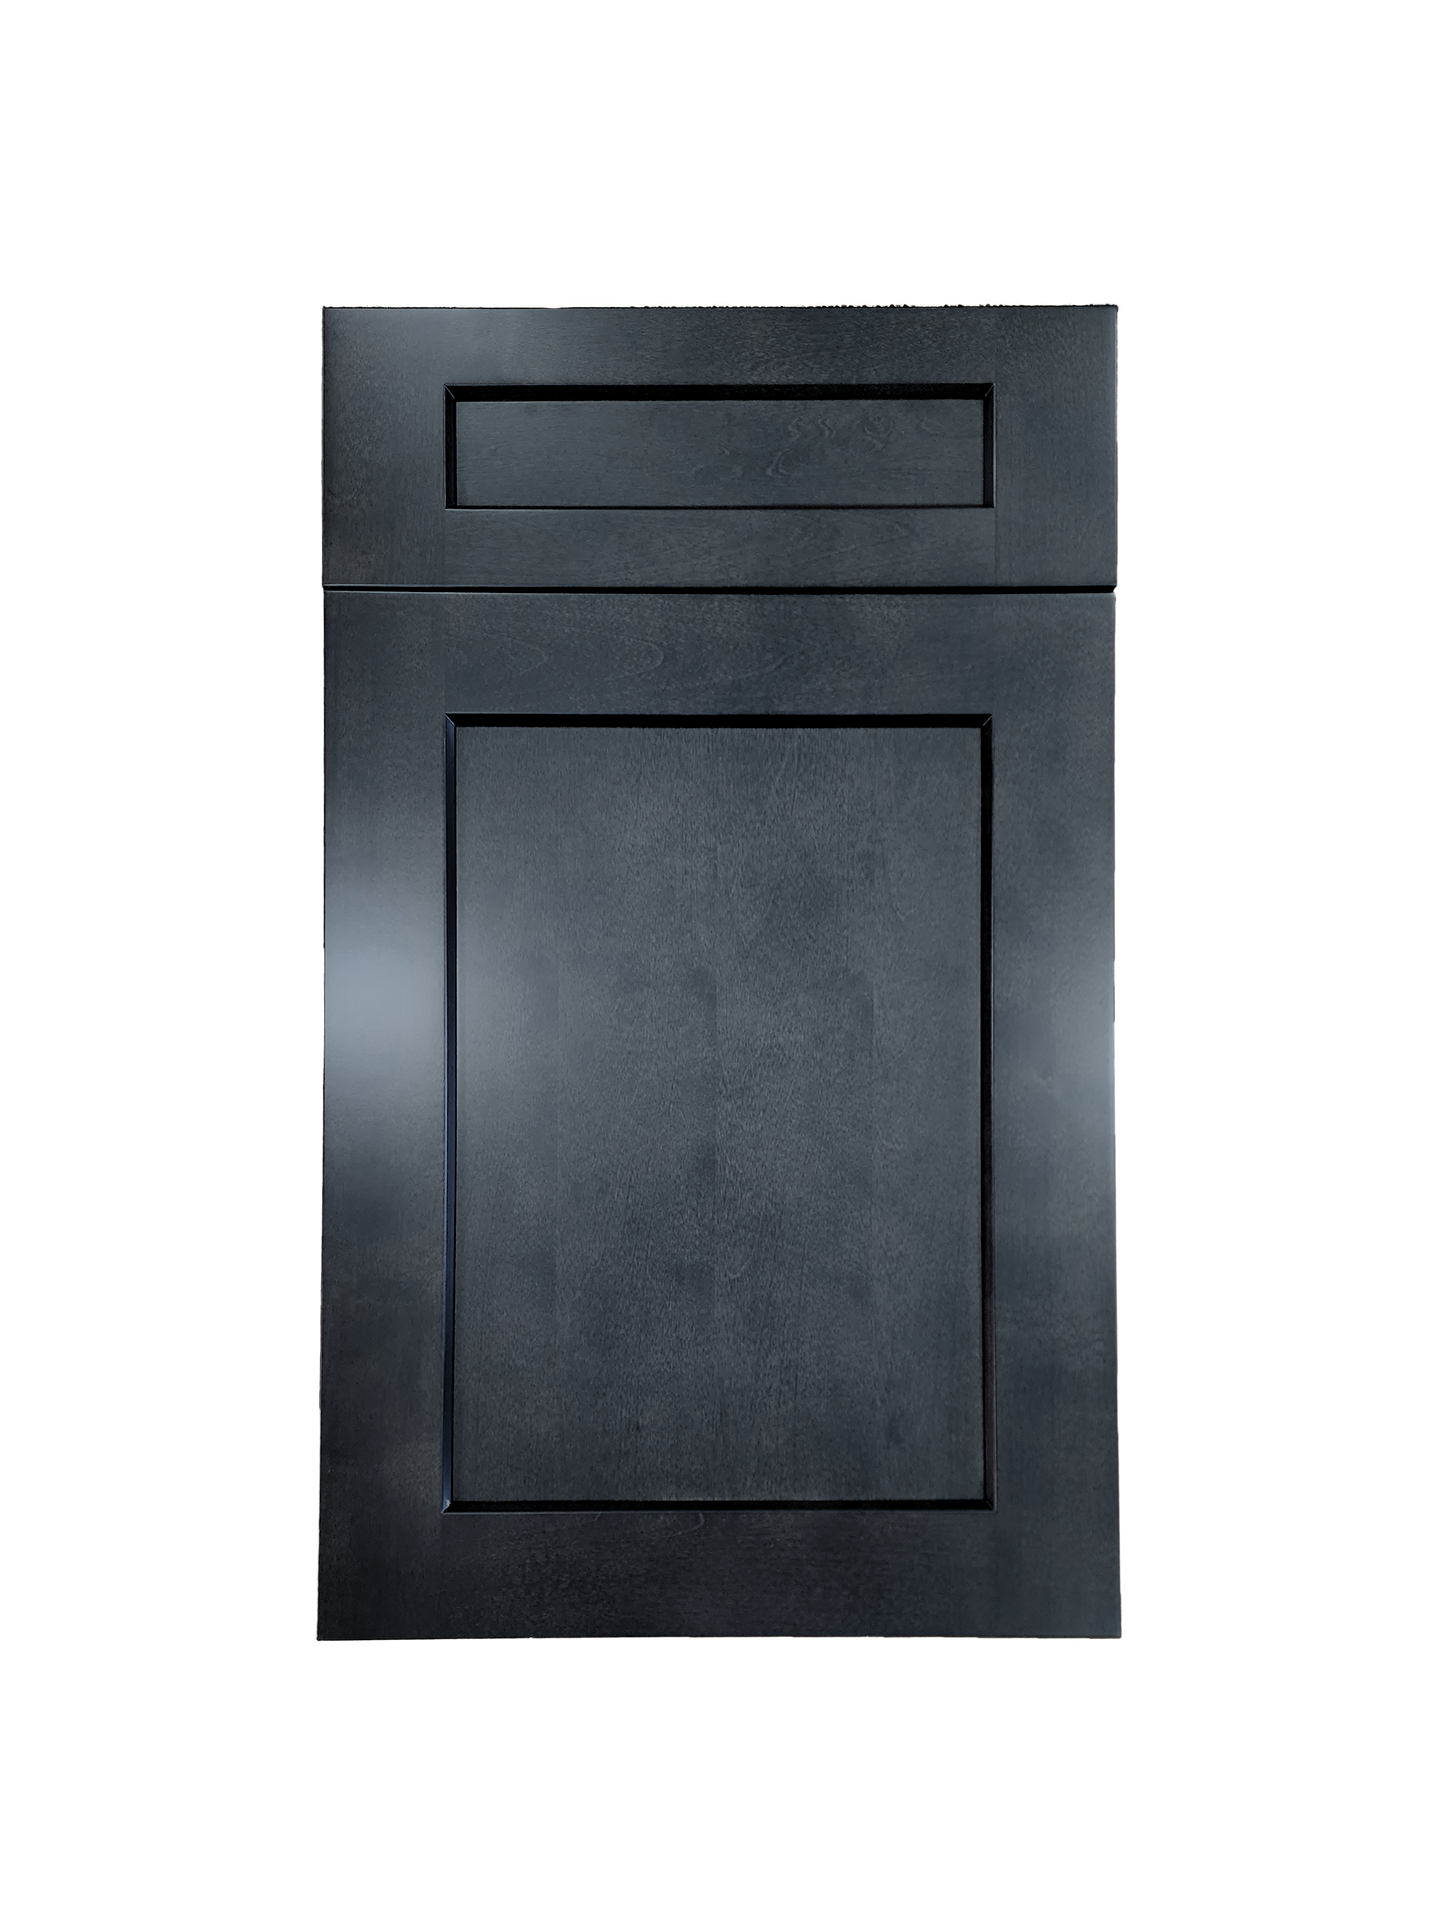 Stormy Grey Oven Cabinet 30 inches wide 24 inches deep 90 inches tall with Stormy Grey box and Stormy Grey doors